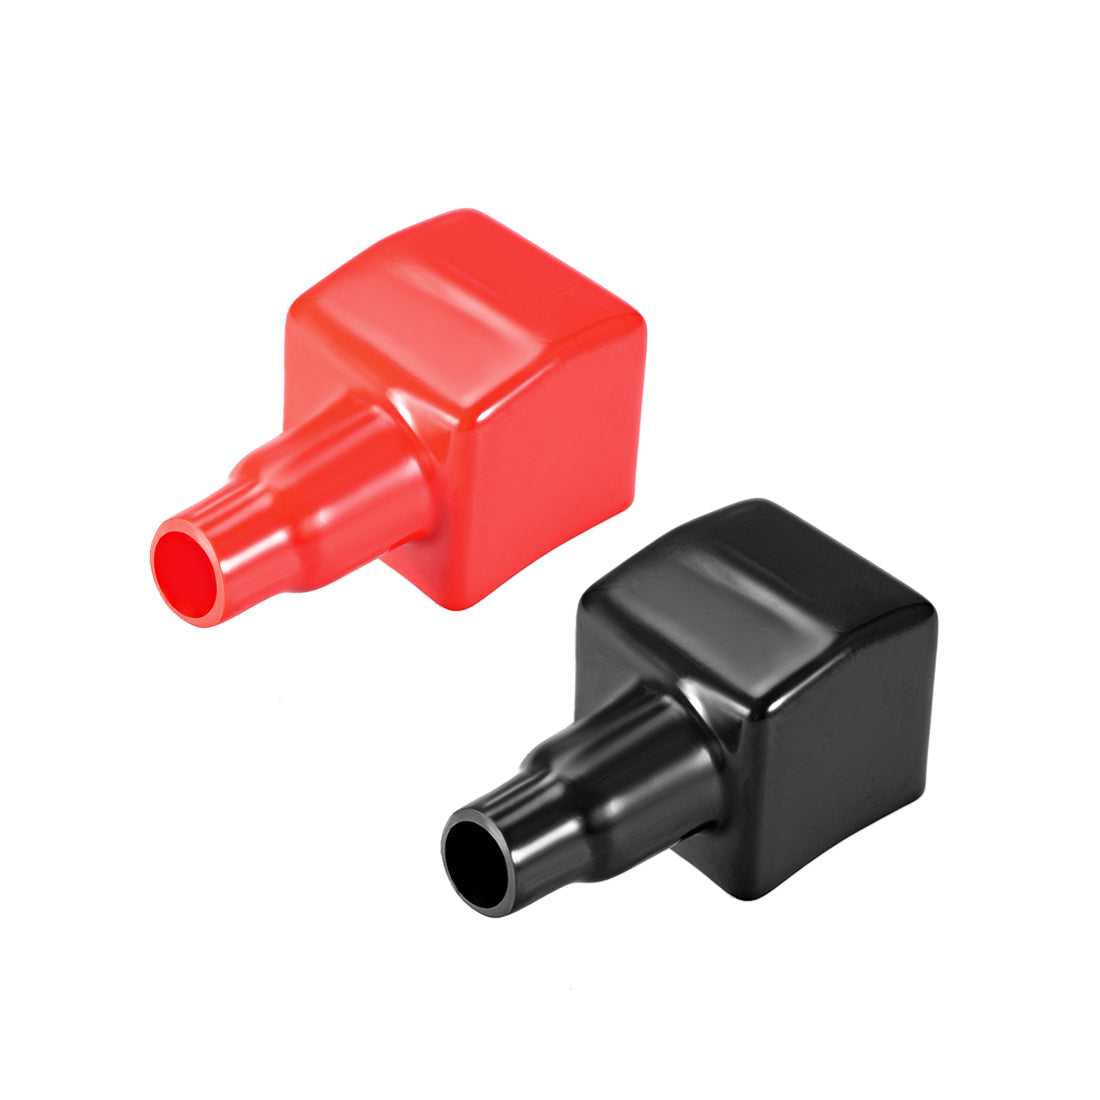 uxcell Uxcell Battery Terminal Insulating Rubber Protector Covers for 15mm Cable Square Red Black 1 Pair